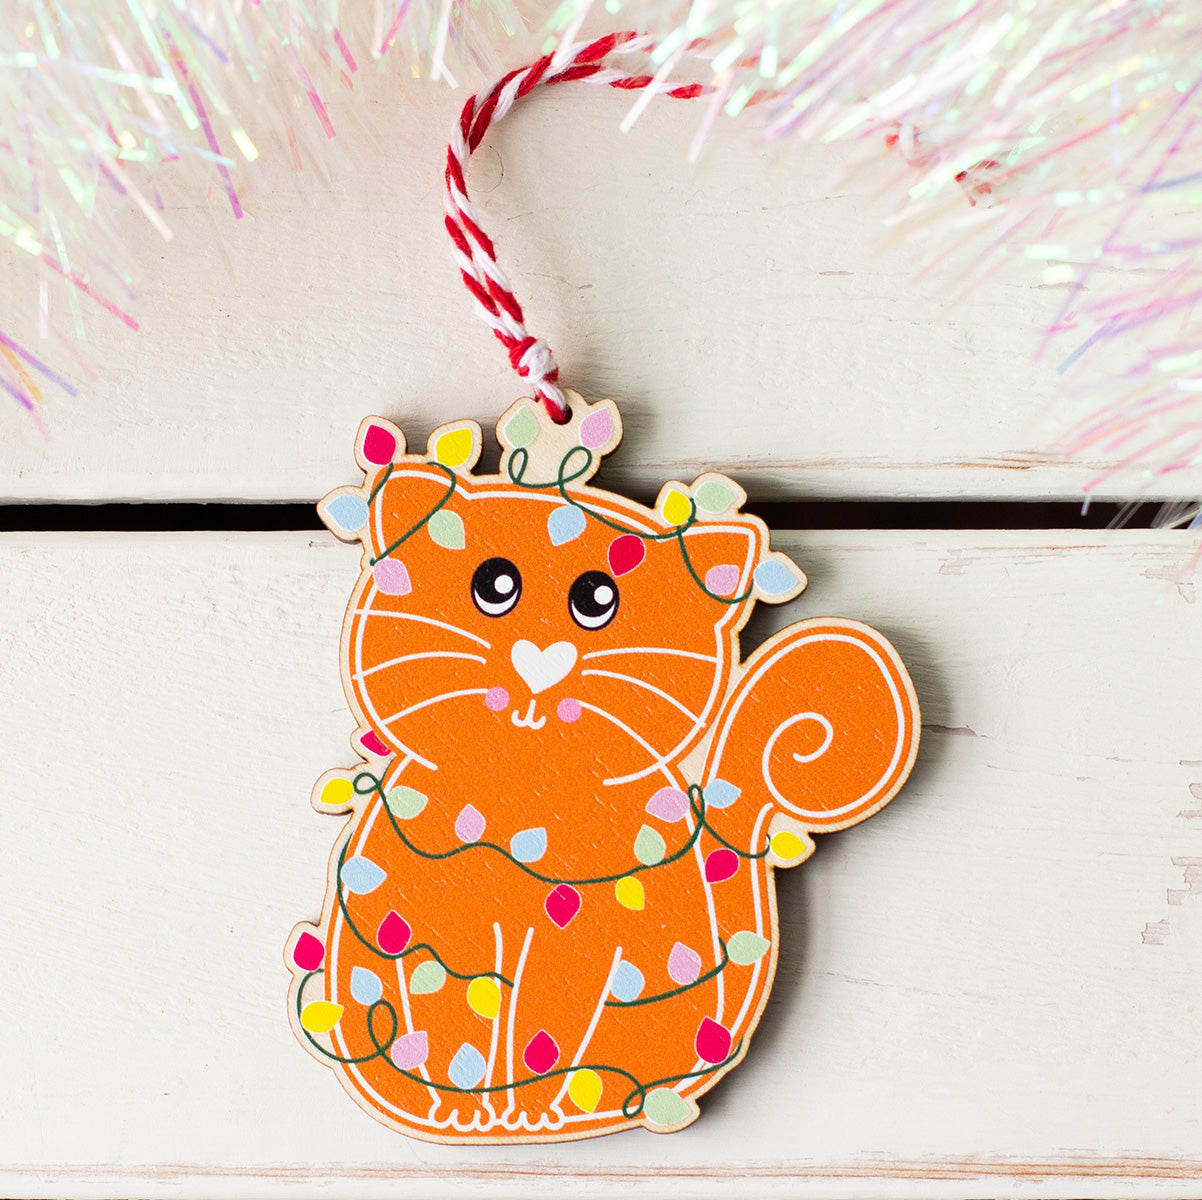 Gingerbread style cat wooden Christmas decoration with red and white twine